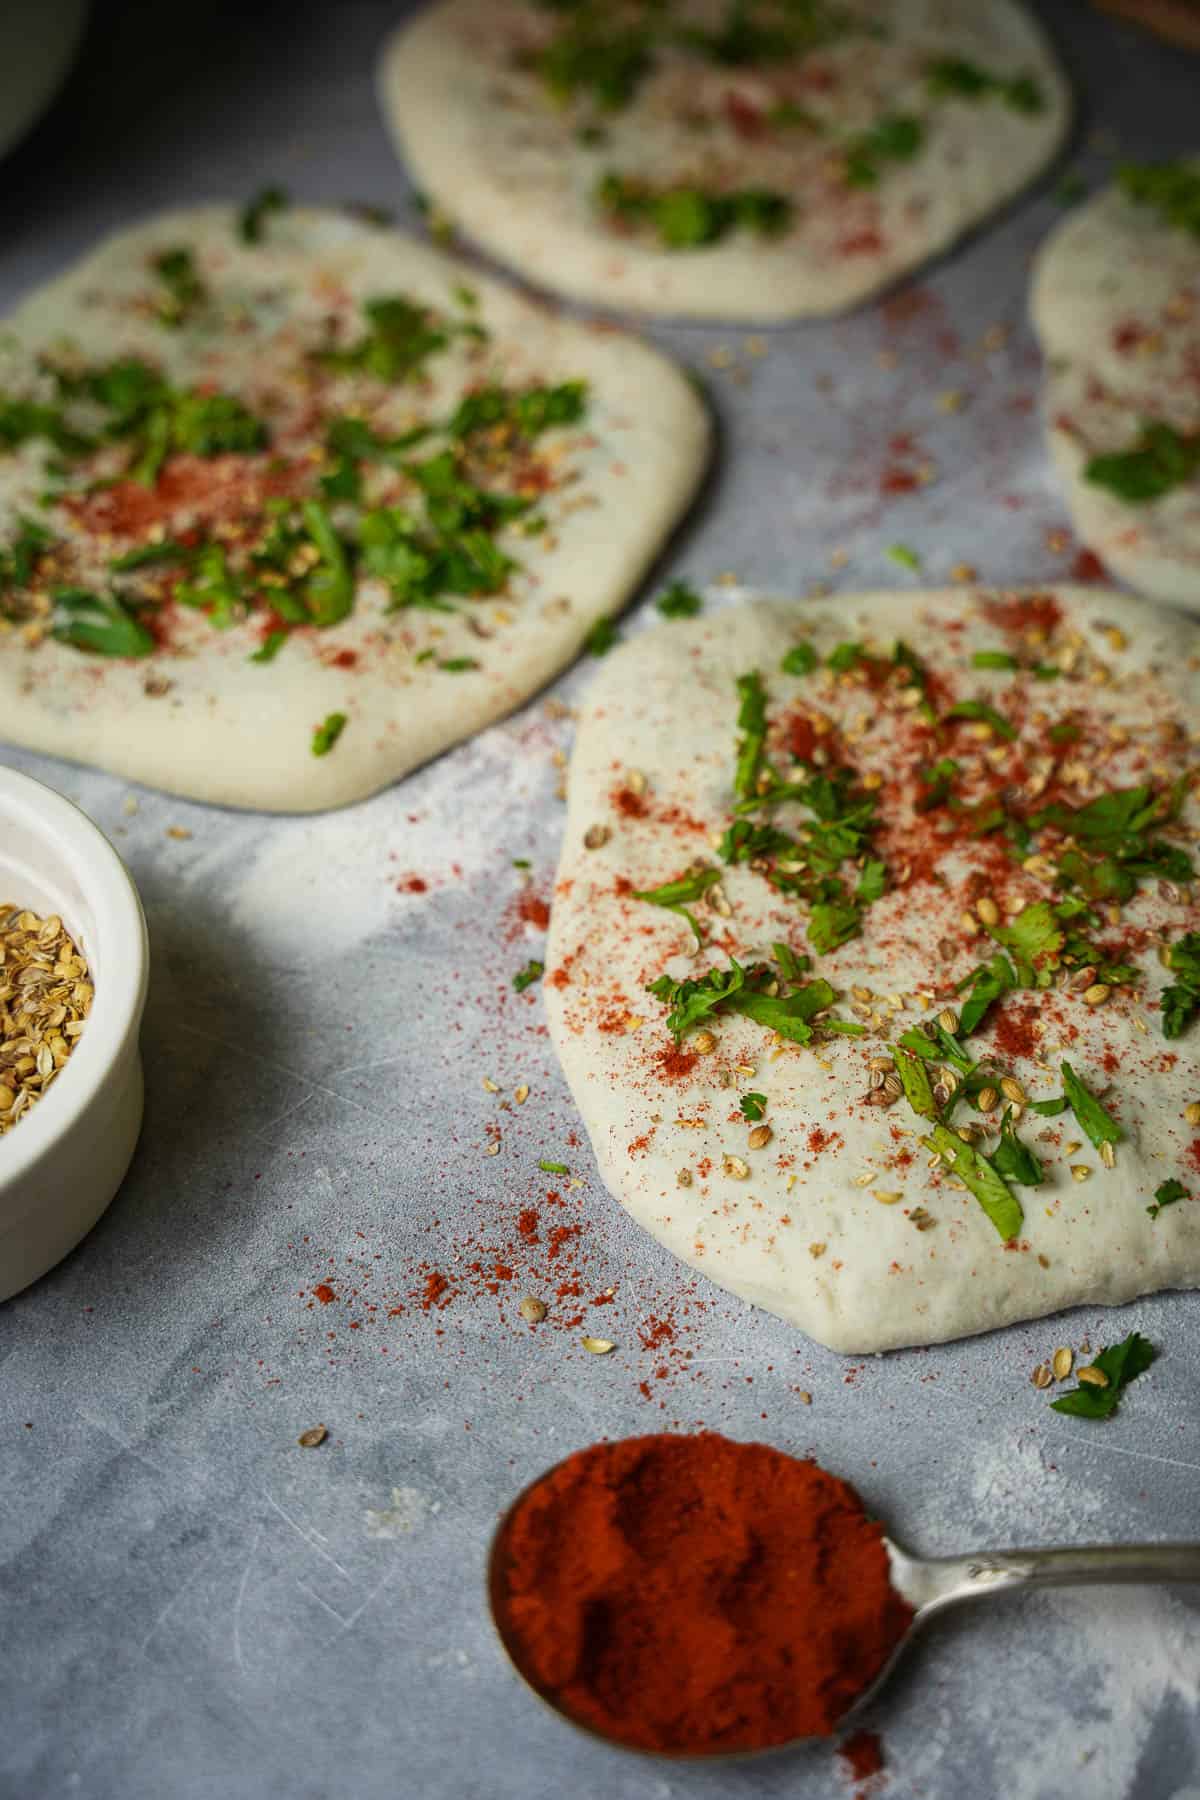 Formed kulcha are sprinkled with coriander seeds, kashmiri red chili and cilantro before being baked.